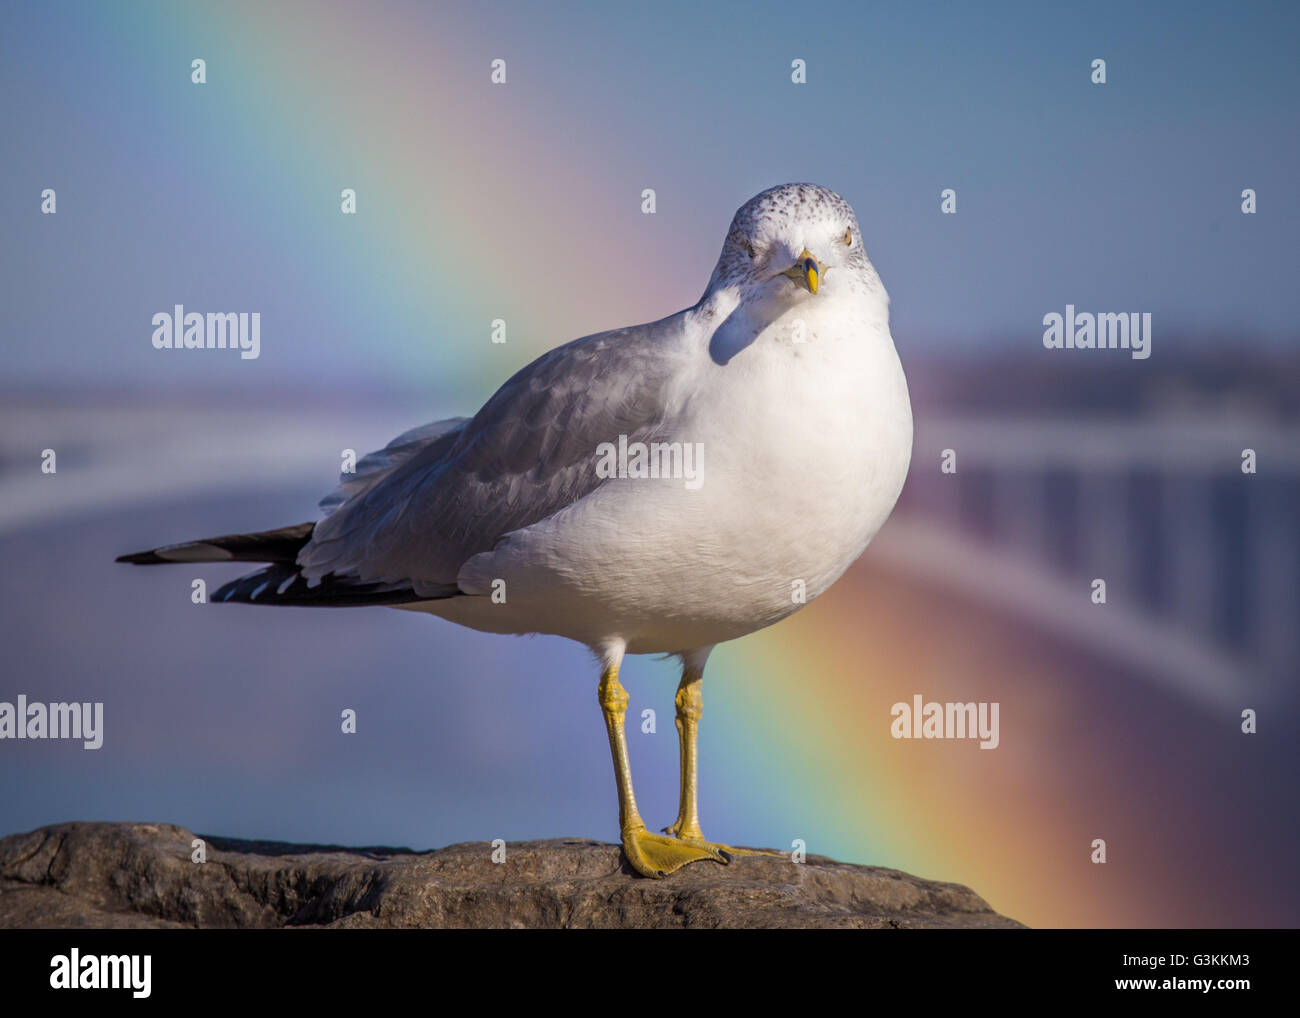 a ring billed gull (Larus delawarensis ) with a rainbow behind it and taken near Niagara Falls Stock Photo